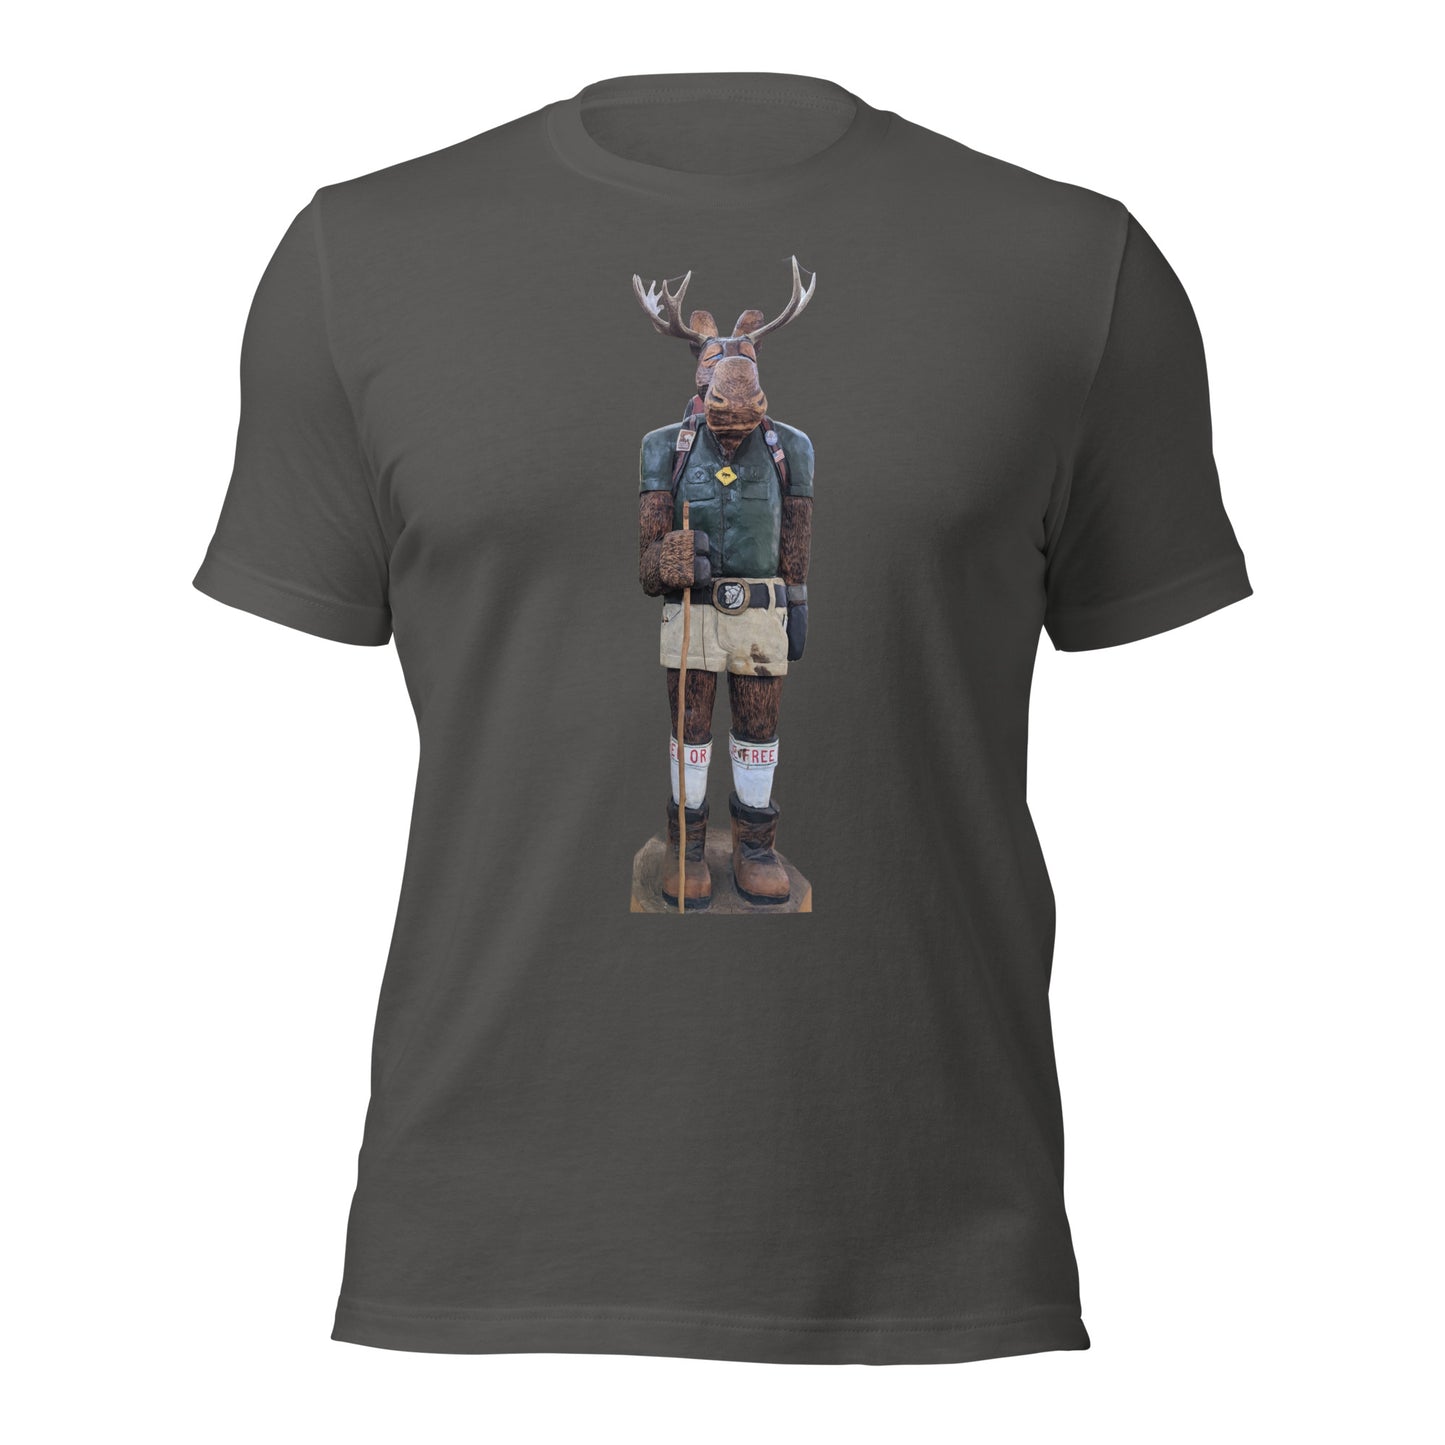 Hiking, Moose, Funny, Trekking, Uniform, Soft, Comfortable, Nature lover, Perfect gift, Unisex t-shirt, T-shirt, Forest